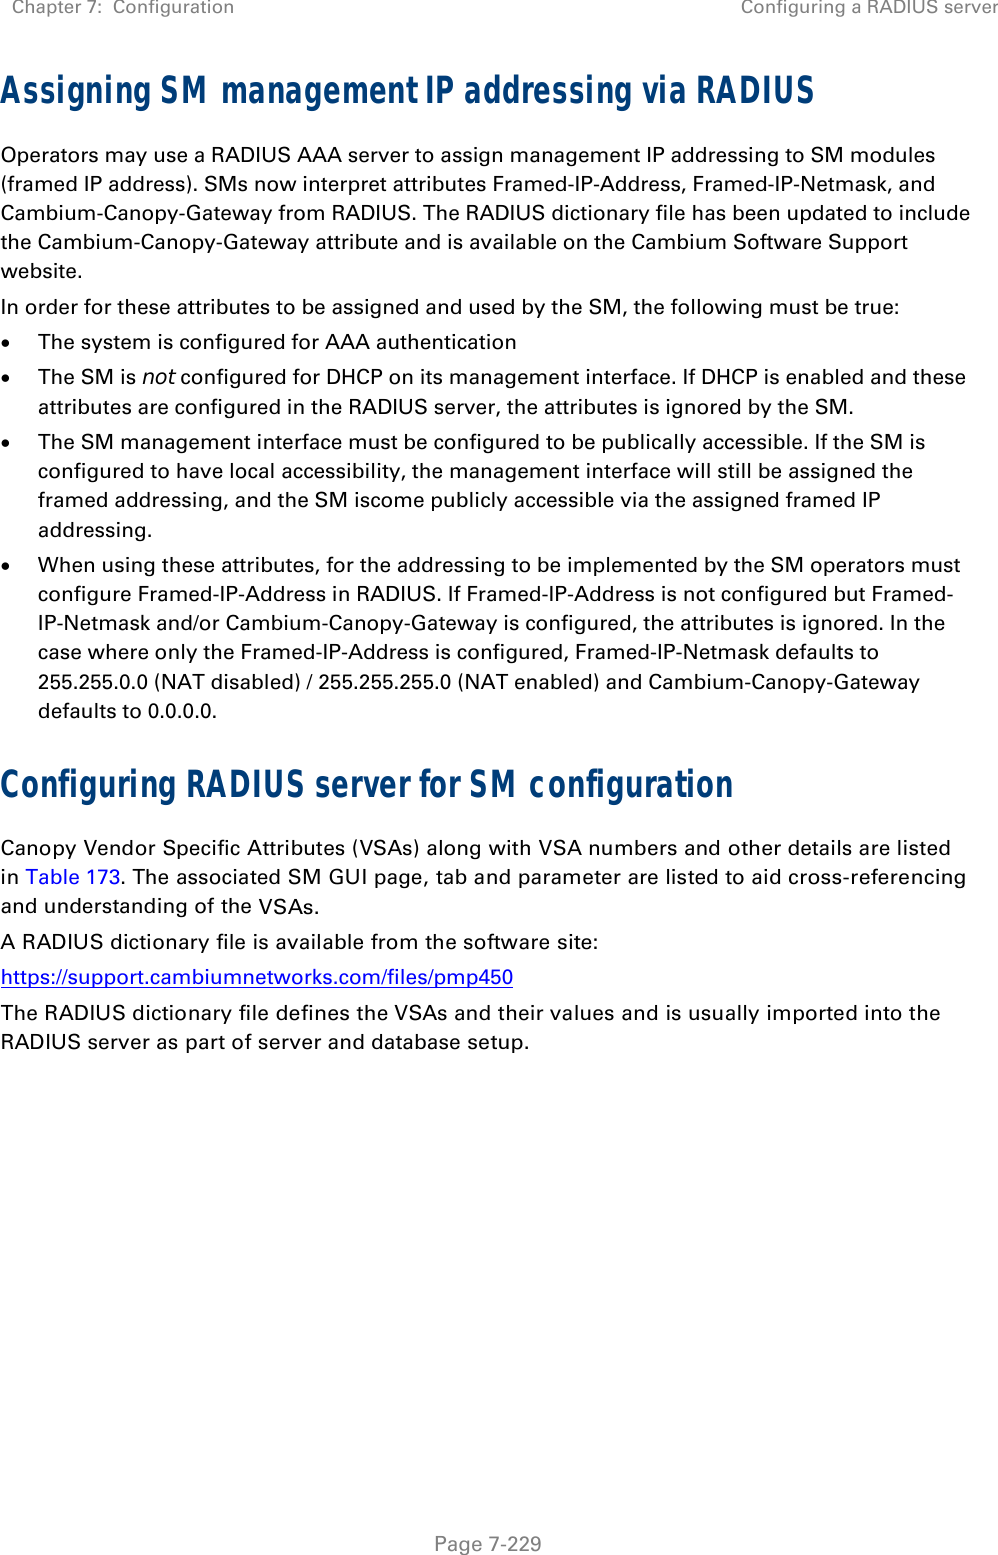 Chapter 7:  Configuration  Configuring a RADIUS server   Page 7-229 Assigning SM management IP addressing via RADIUS Operators may use a RADIUS AAA server to assign management IP addressing to SM modules (framed IP address). SMs now interpret attributes Framed-IP-Address, Framed-IP-Netmask, and Cambium-Canopy-Gateway from RADIUS. The RADIUS dictionary file has been updated to include the Cambium-Canopy-Gateway attribute and is available on the Cambium Software Support website. In order for these attributes to be assigned and used by the SM, the following must be true:  The system is configured for AAA authentication  The SM is not configured for DHCP on its management interface. If DHCP is enabled and these attributes are configured in the RADIUS server, the attributes is ignored by the SM.  The SM management interface must be configured to be publically accessible. If the SM is configured to have local accessibility, the management interface will still be assigned the framed addressing, and the SM iscome publicly accessible via the assigned framed IP addressing.  When using these attributes, for the addressing to be implemented by the SM operators must configure Framed-IP-Address in RADIUS. If Framed-IP-Address is not configured but Framed-IP-Netmask and/or Cambium-Canopy-Gateway is configured, the attributes is ignored. In the case where only the Framed-IP-Address is configured, Framed-IP-Netmask defaults to 255.255.0.0 (NAT disabled) / 255.255.255.0 (NAT enabled) and Cambium-Canopy-Gateway defaults to 0.0.0.0. Configuring RADIUS server for SM configuration Canopy Vendor Specific Attributes (VSAs) along with VSA numbers and other details are listed in Table 173. The associated SM GUI page, tab and parameter are listed to aid cross-referencing and understanding of the VSAs. A RADIUS dictionary file is available from the software site:  https://support.cambiumnetworks.com/files/pmp450 The RADIUS dictionary file defines the VSAs and their values and is usually imported into the RADIUS server as part of server and database setup.  